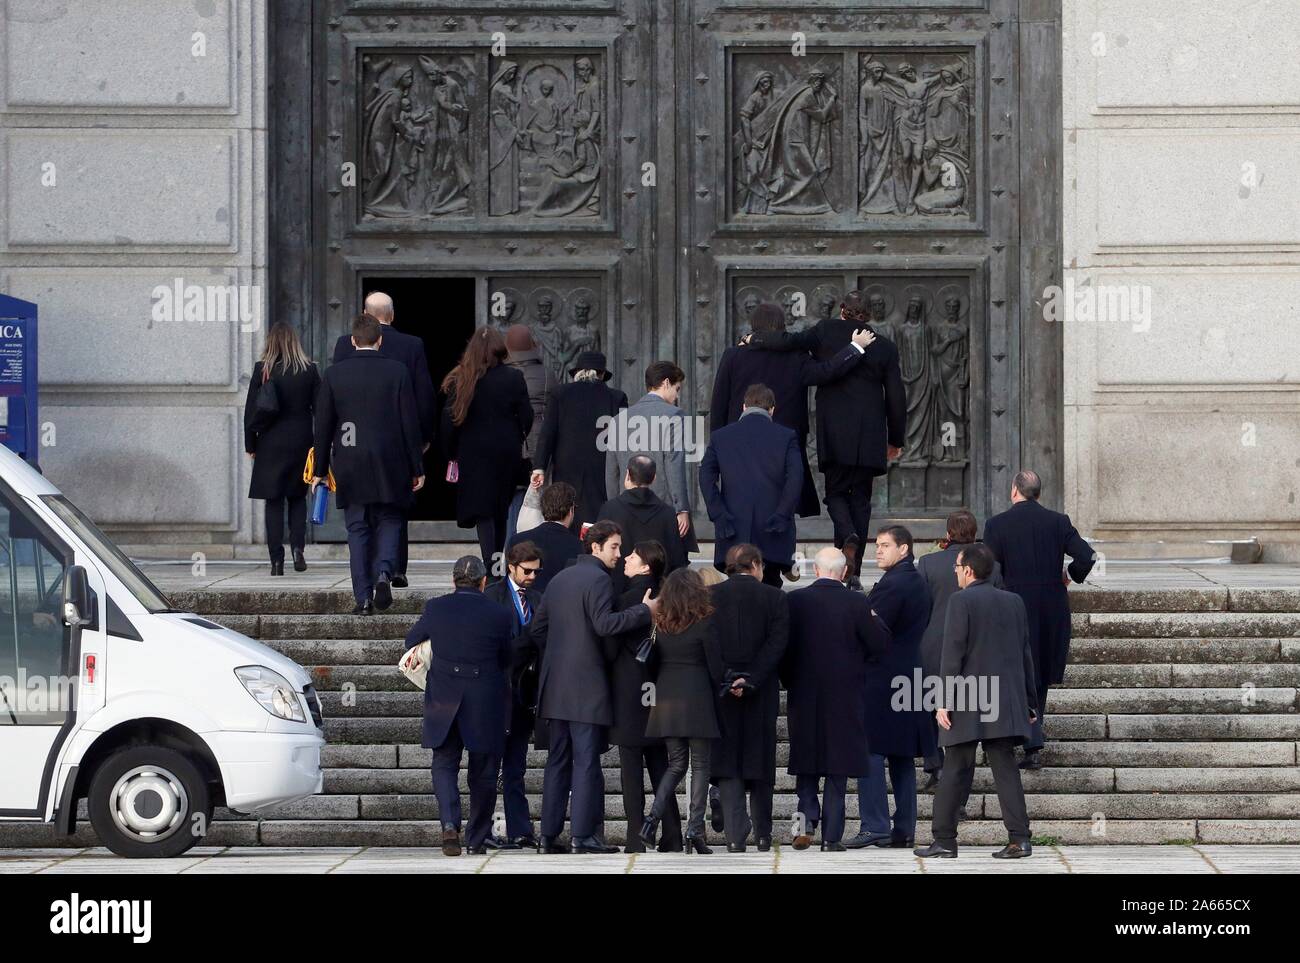 Madrid, Spain. 24th Oct 2019. Family attends to the Exhumation of the body of Francisco Franco at Catholic Basilica of the Valley of the Fallen on October 24, 2019 in San Lorenzo de El Escoria, Spain The body of dictator Gen. Francisco Franco has been exhumed from the grandiose mausoleum at the Valley of the Fallen before being transferred to cemeteryof Mingorrubio in a Pantheon next to the mortal remains of his wife, Carmen Polo. Credit: MediaPunch Inc/Alamy Live News Stock Photo